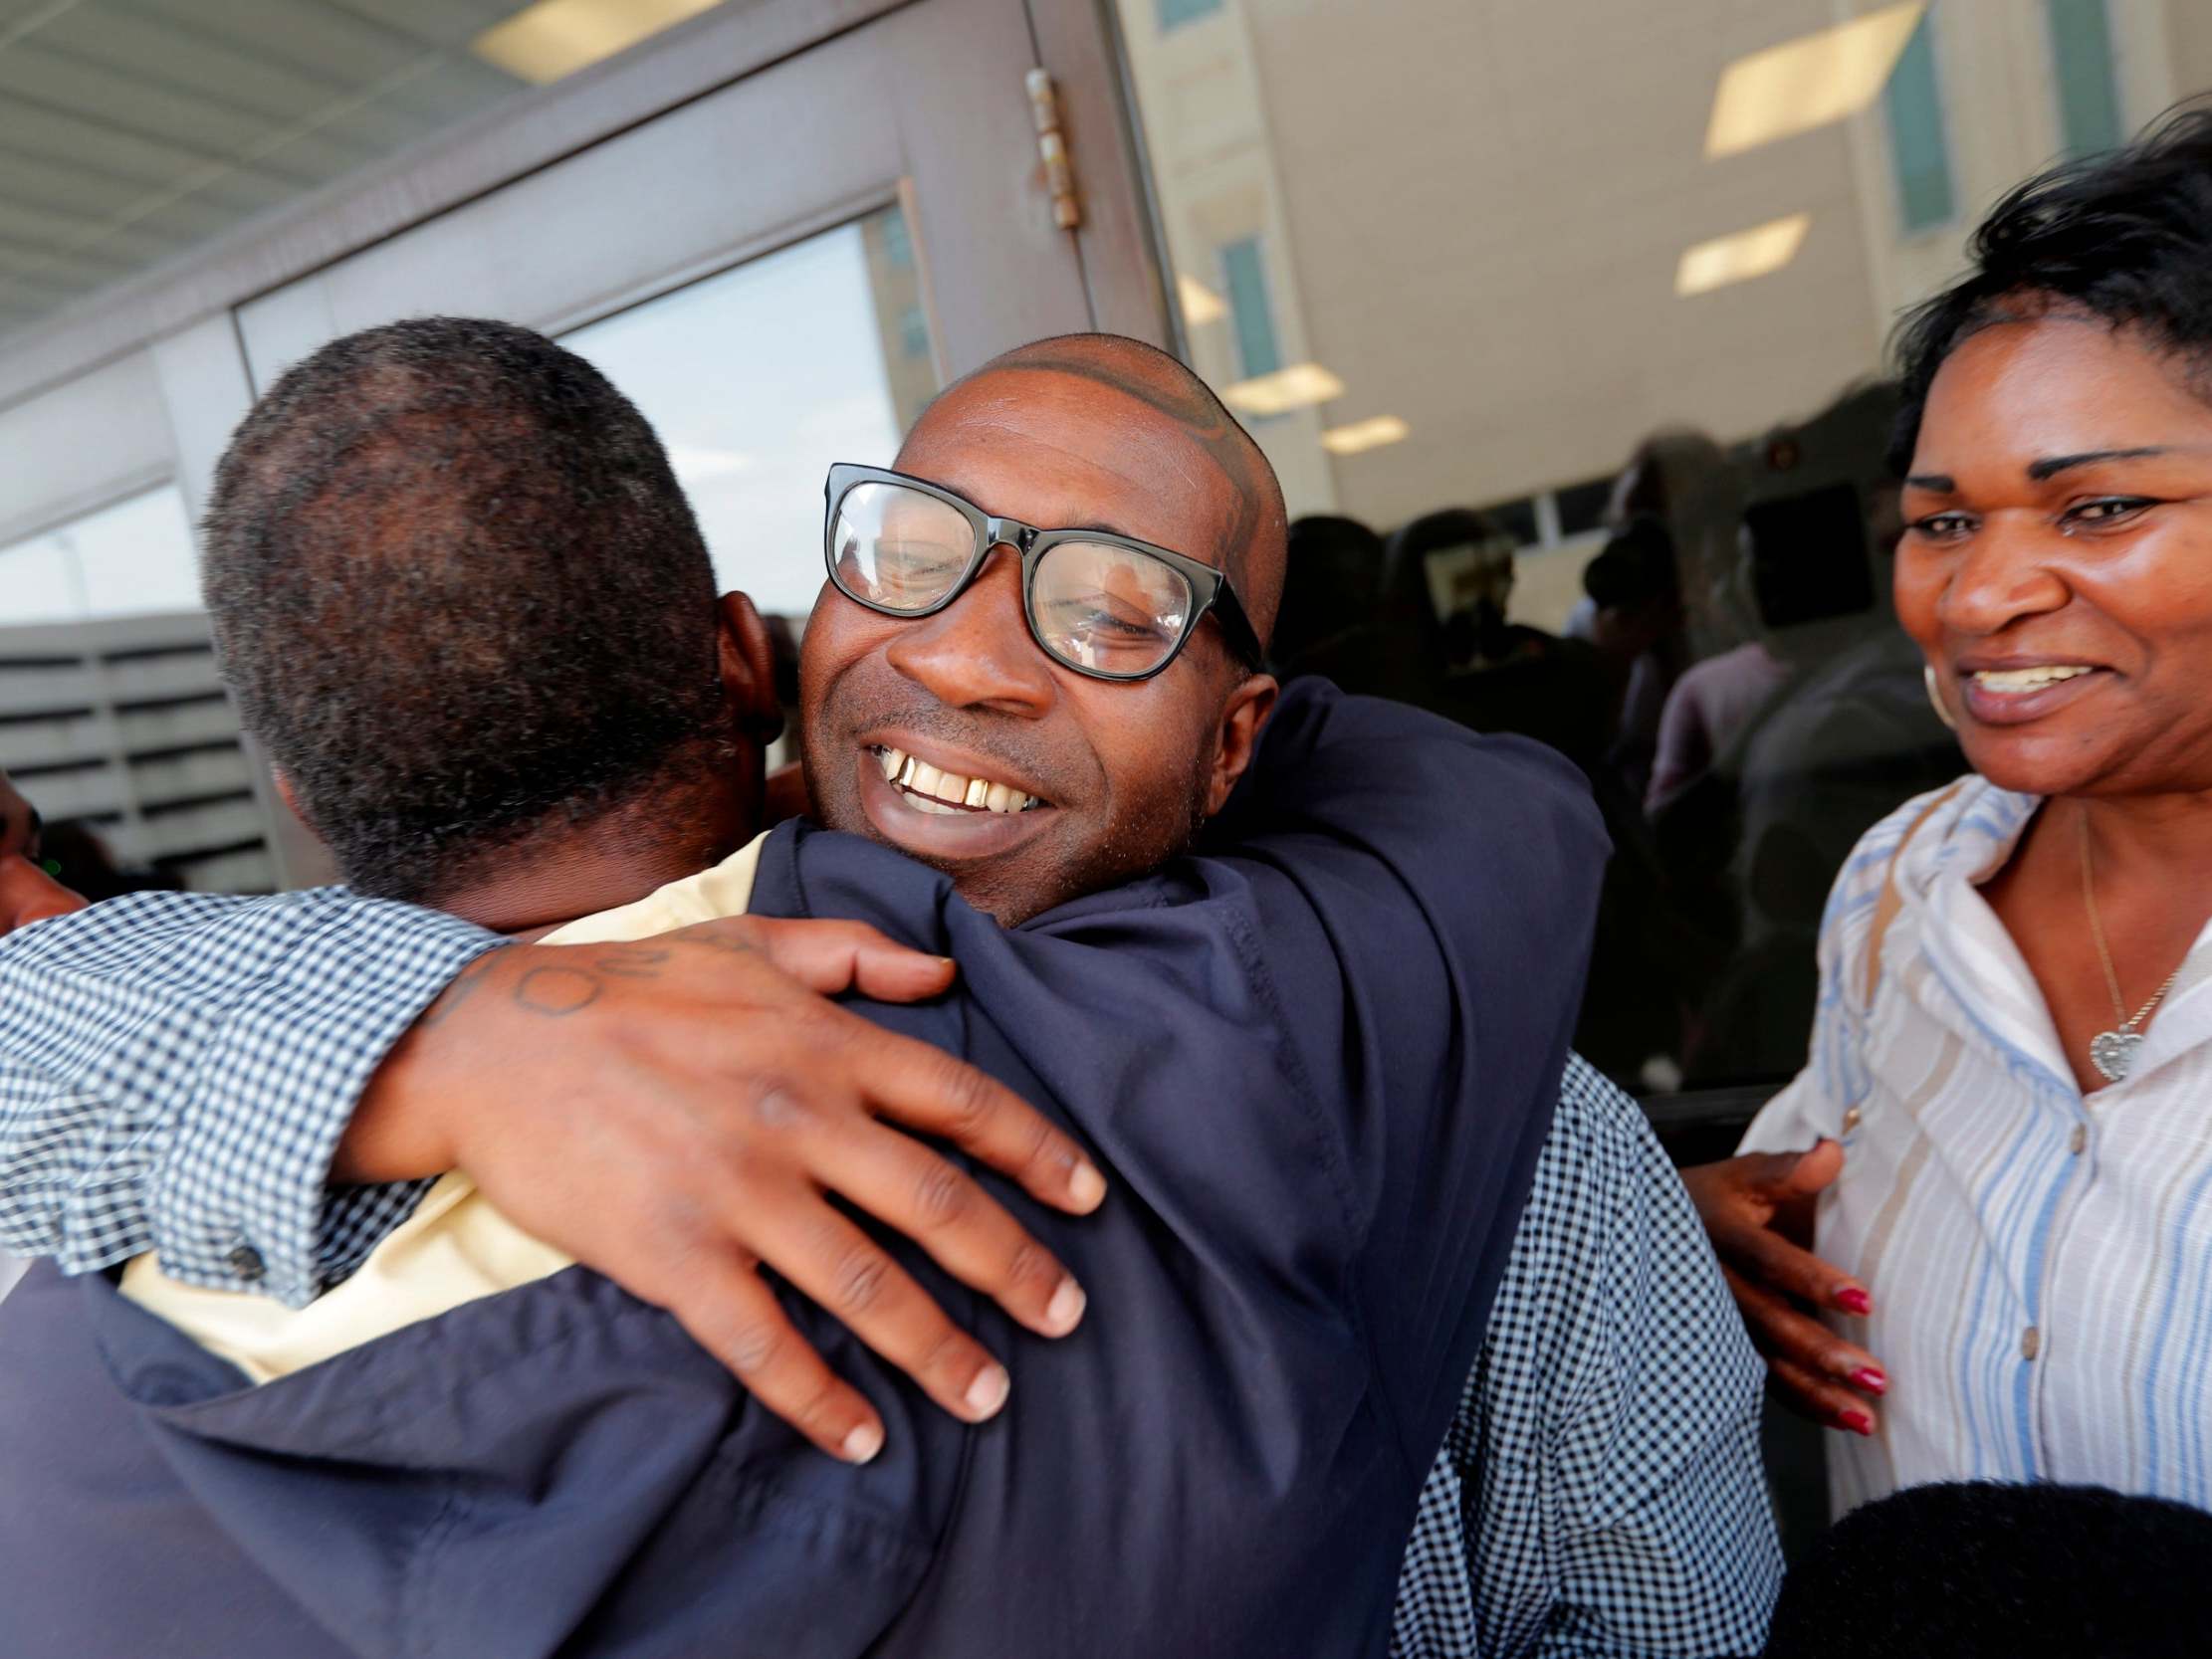 Royal Clark Jr hugs his father outside the Jefferson Parish jail, after he was freed from his 49-year sentence over an armed robbery he did not commit